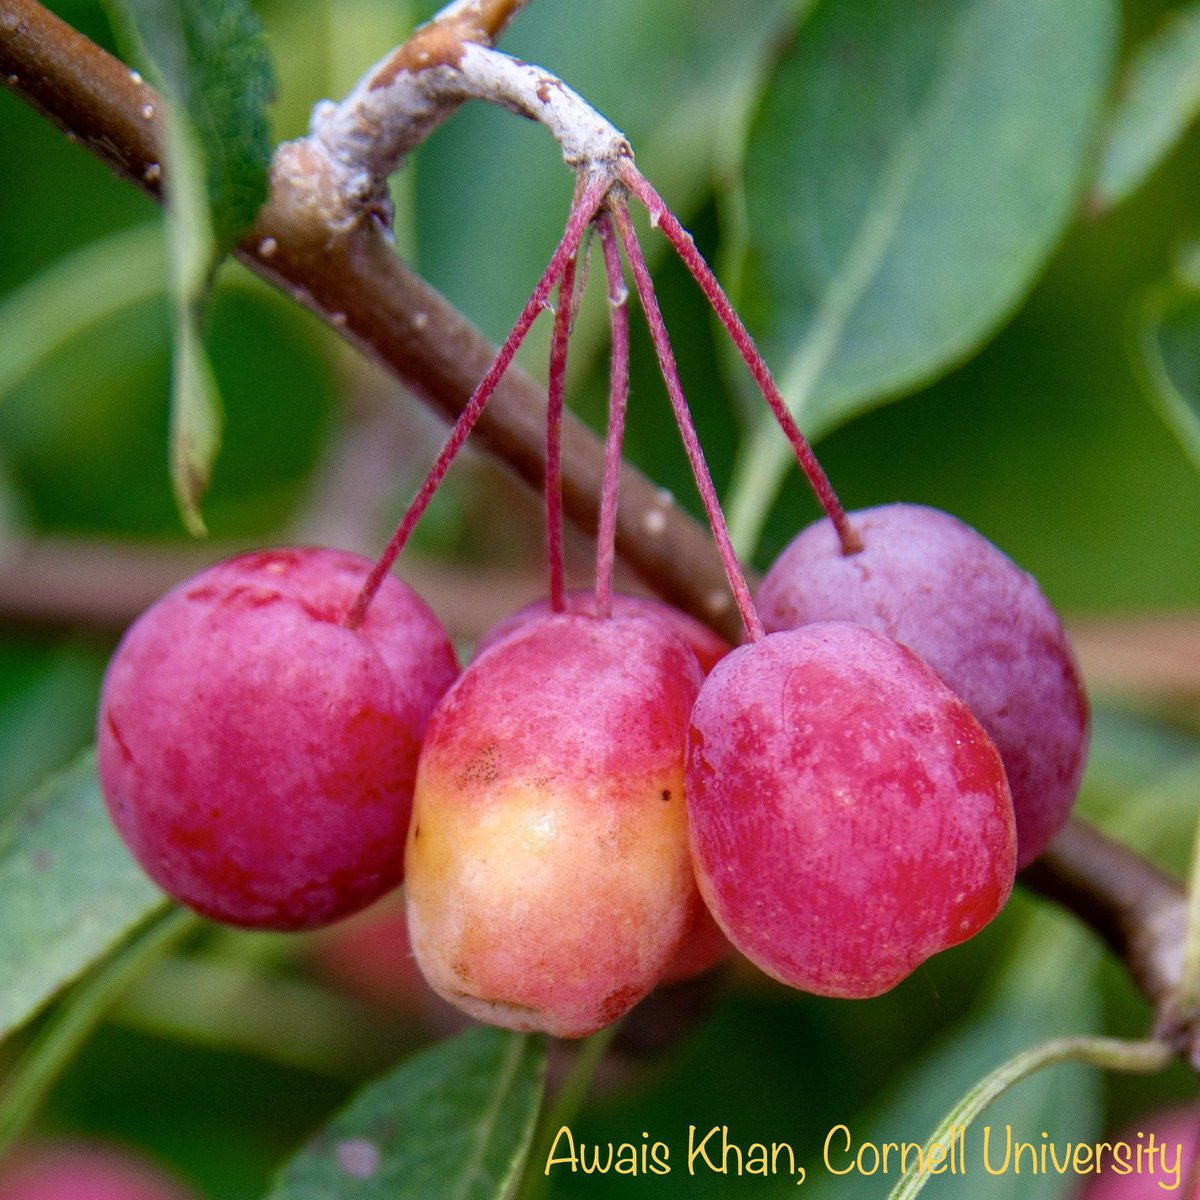 Apples & their wild relatives offer amazing diversity! This is Malus x dawsoniana, a hybrid with beautiful fruit shapes & colors. #GeneticDiversity #CropWildRelatives #Apples